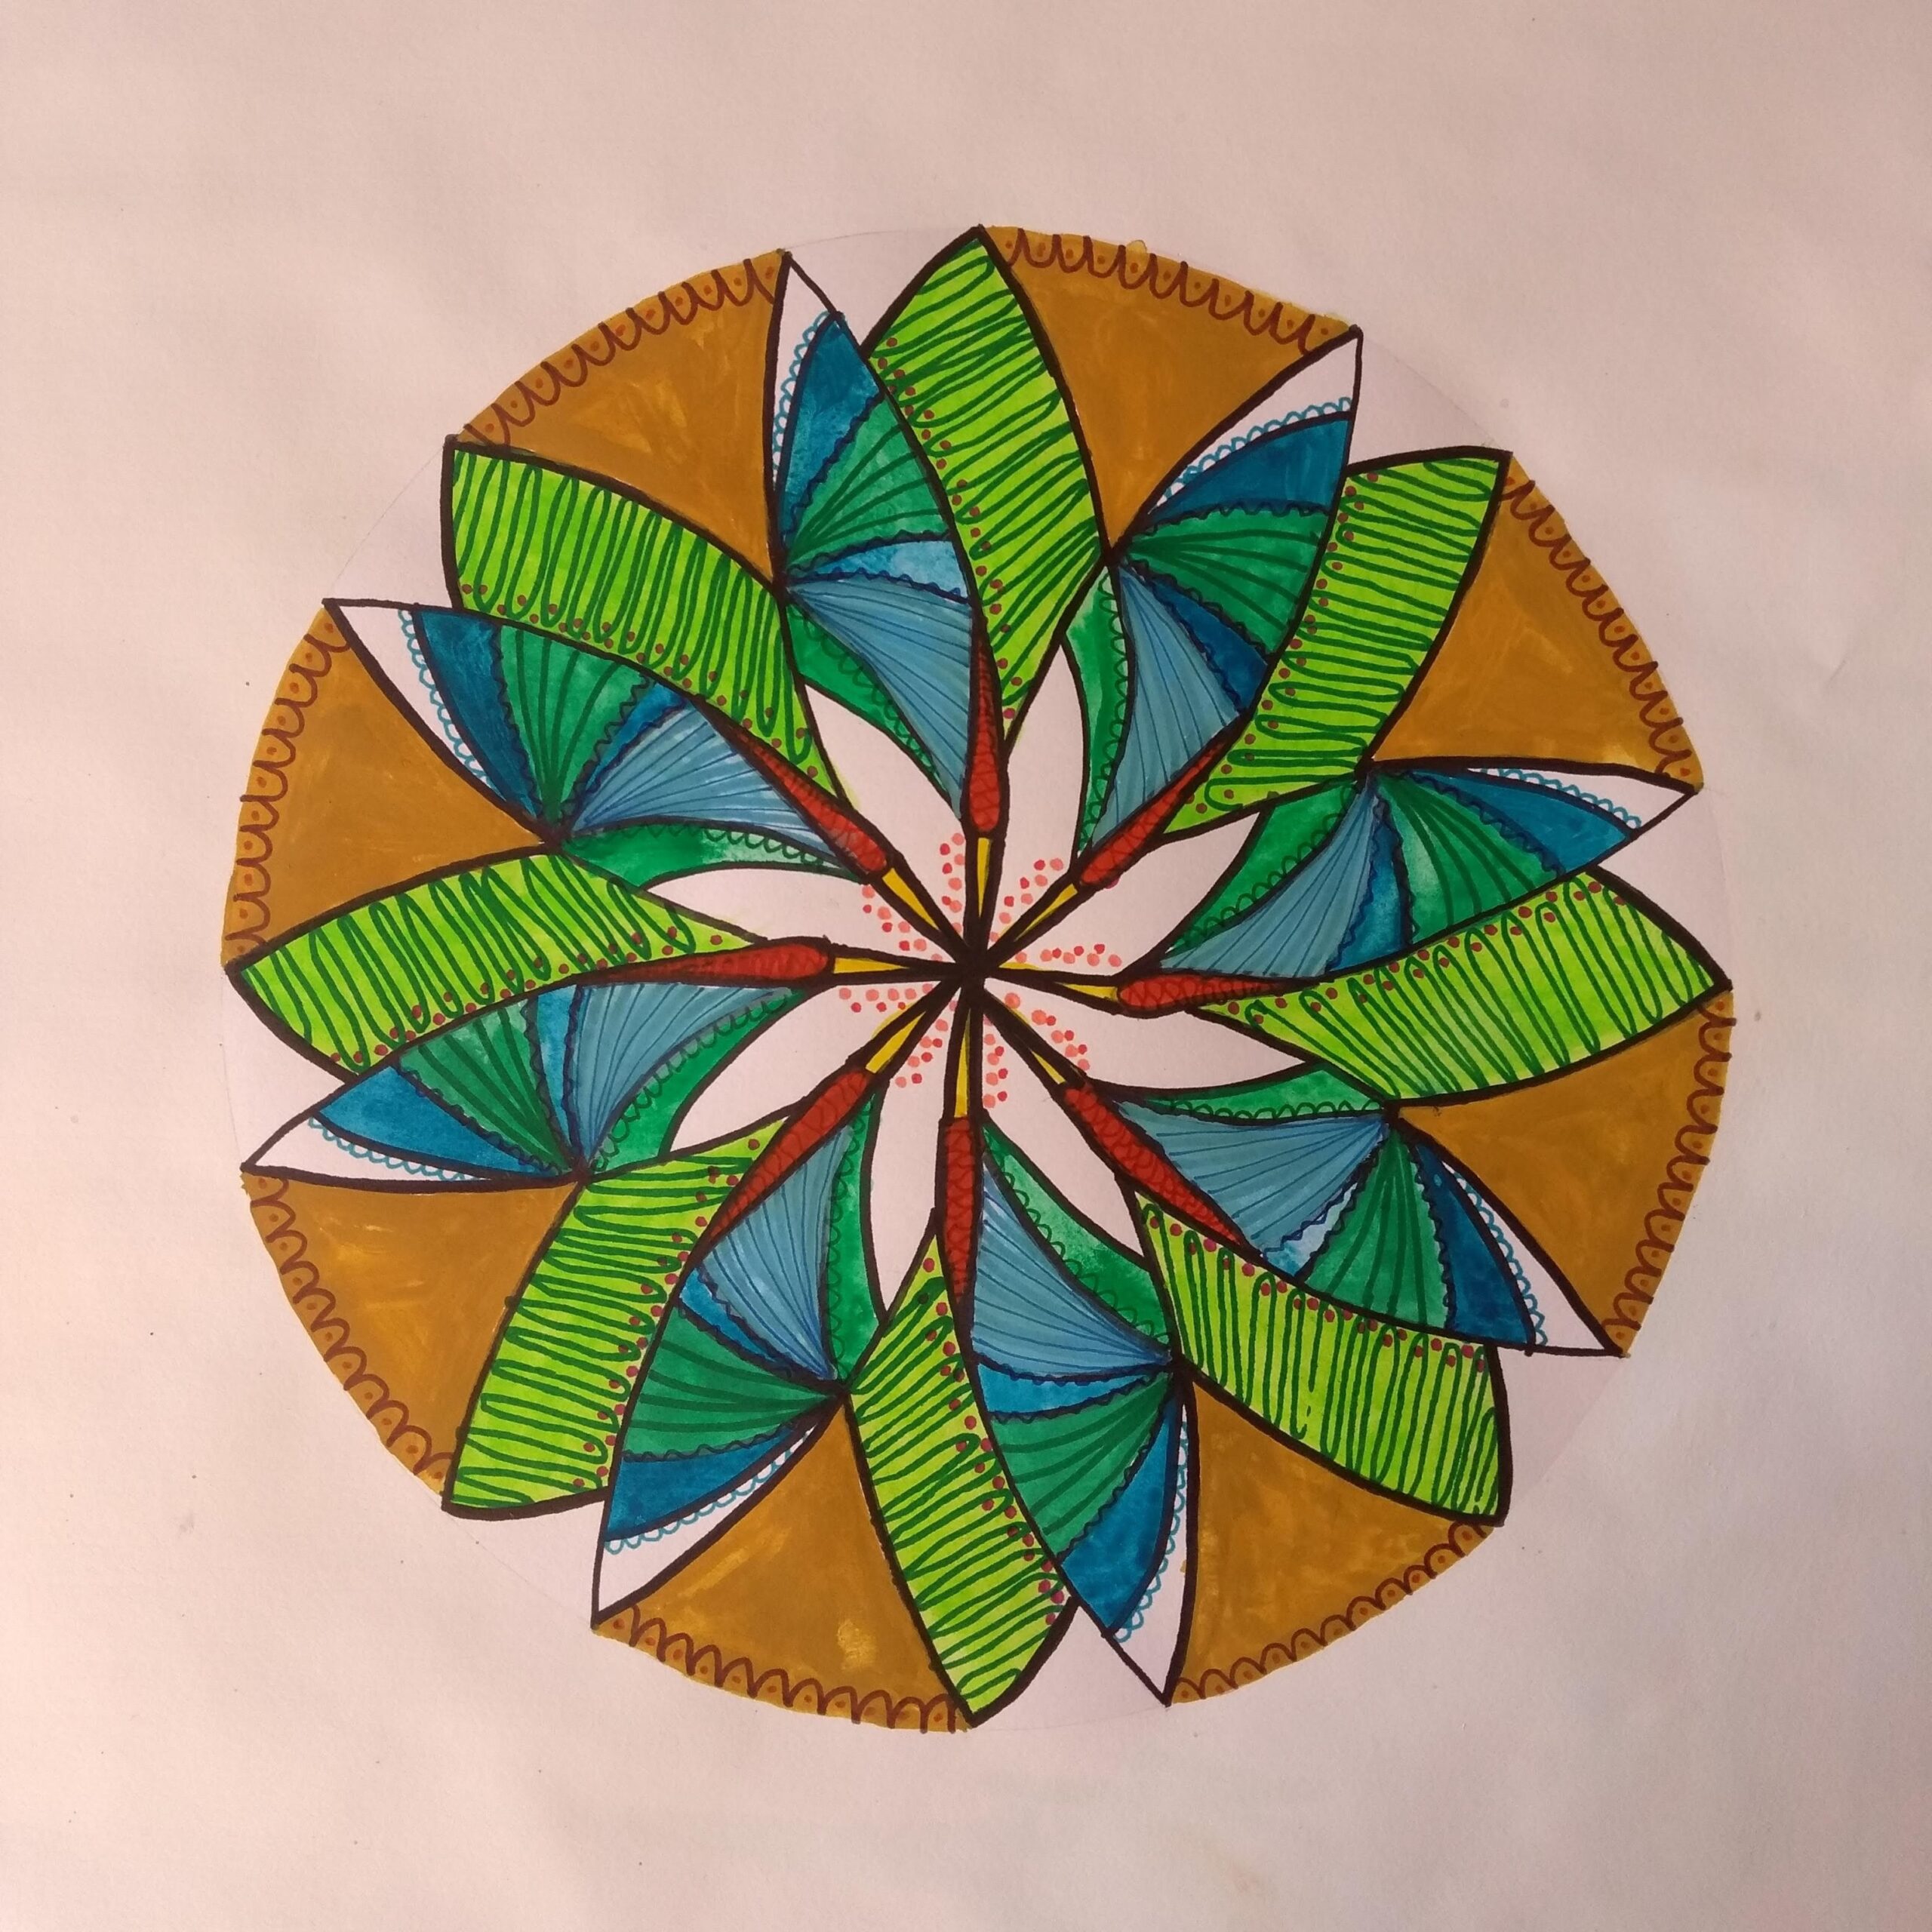 Simple patterns radiate out from the centre of a circle, creating a geometric flower-like design in sky blue, bright green and a sandy gold colour.